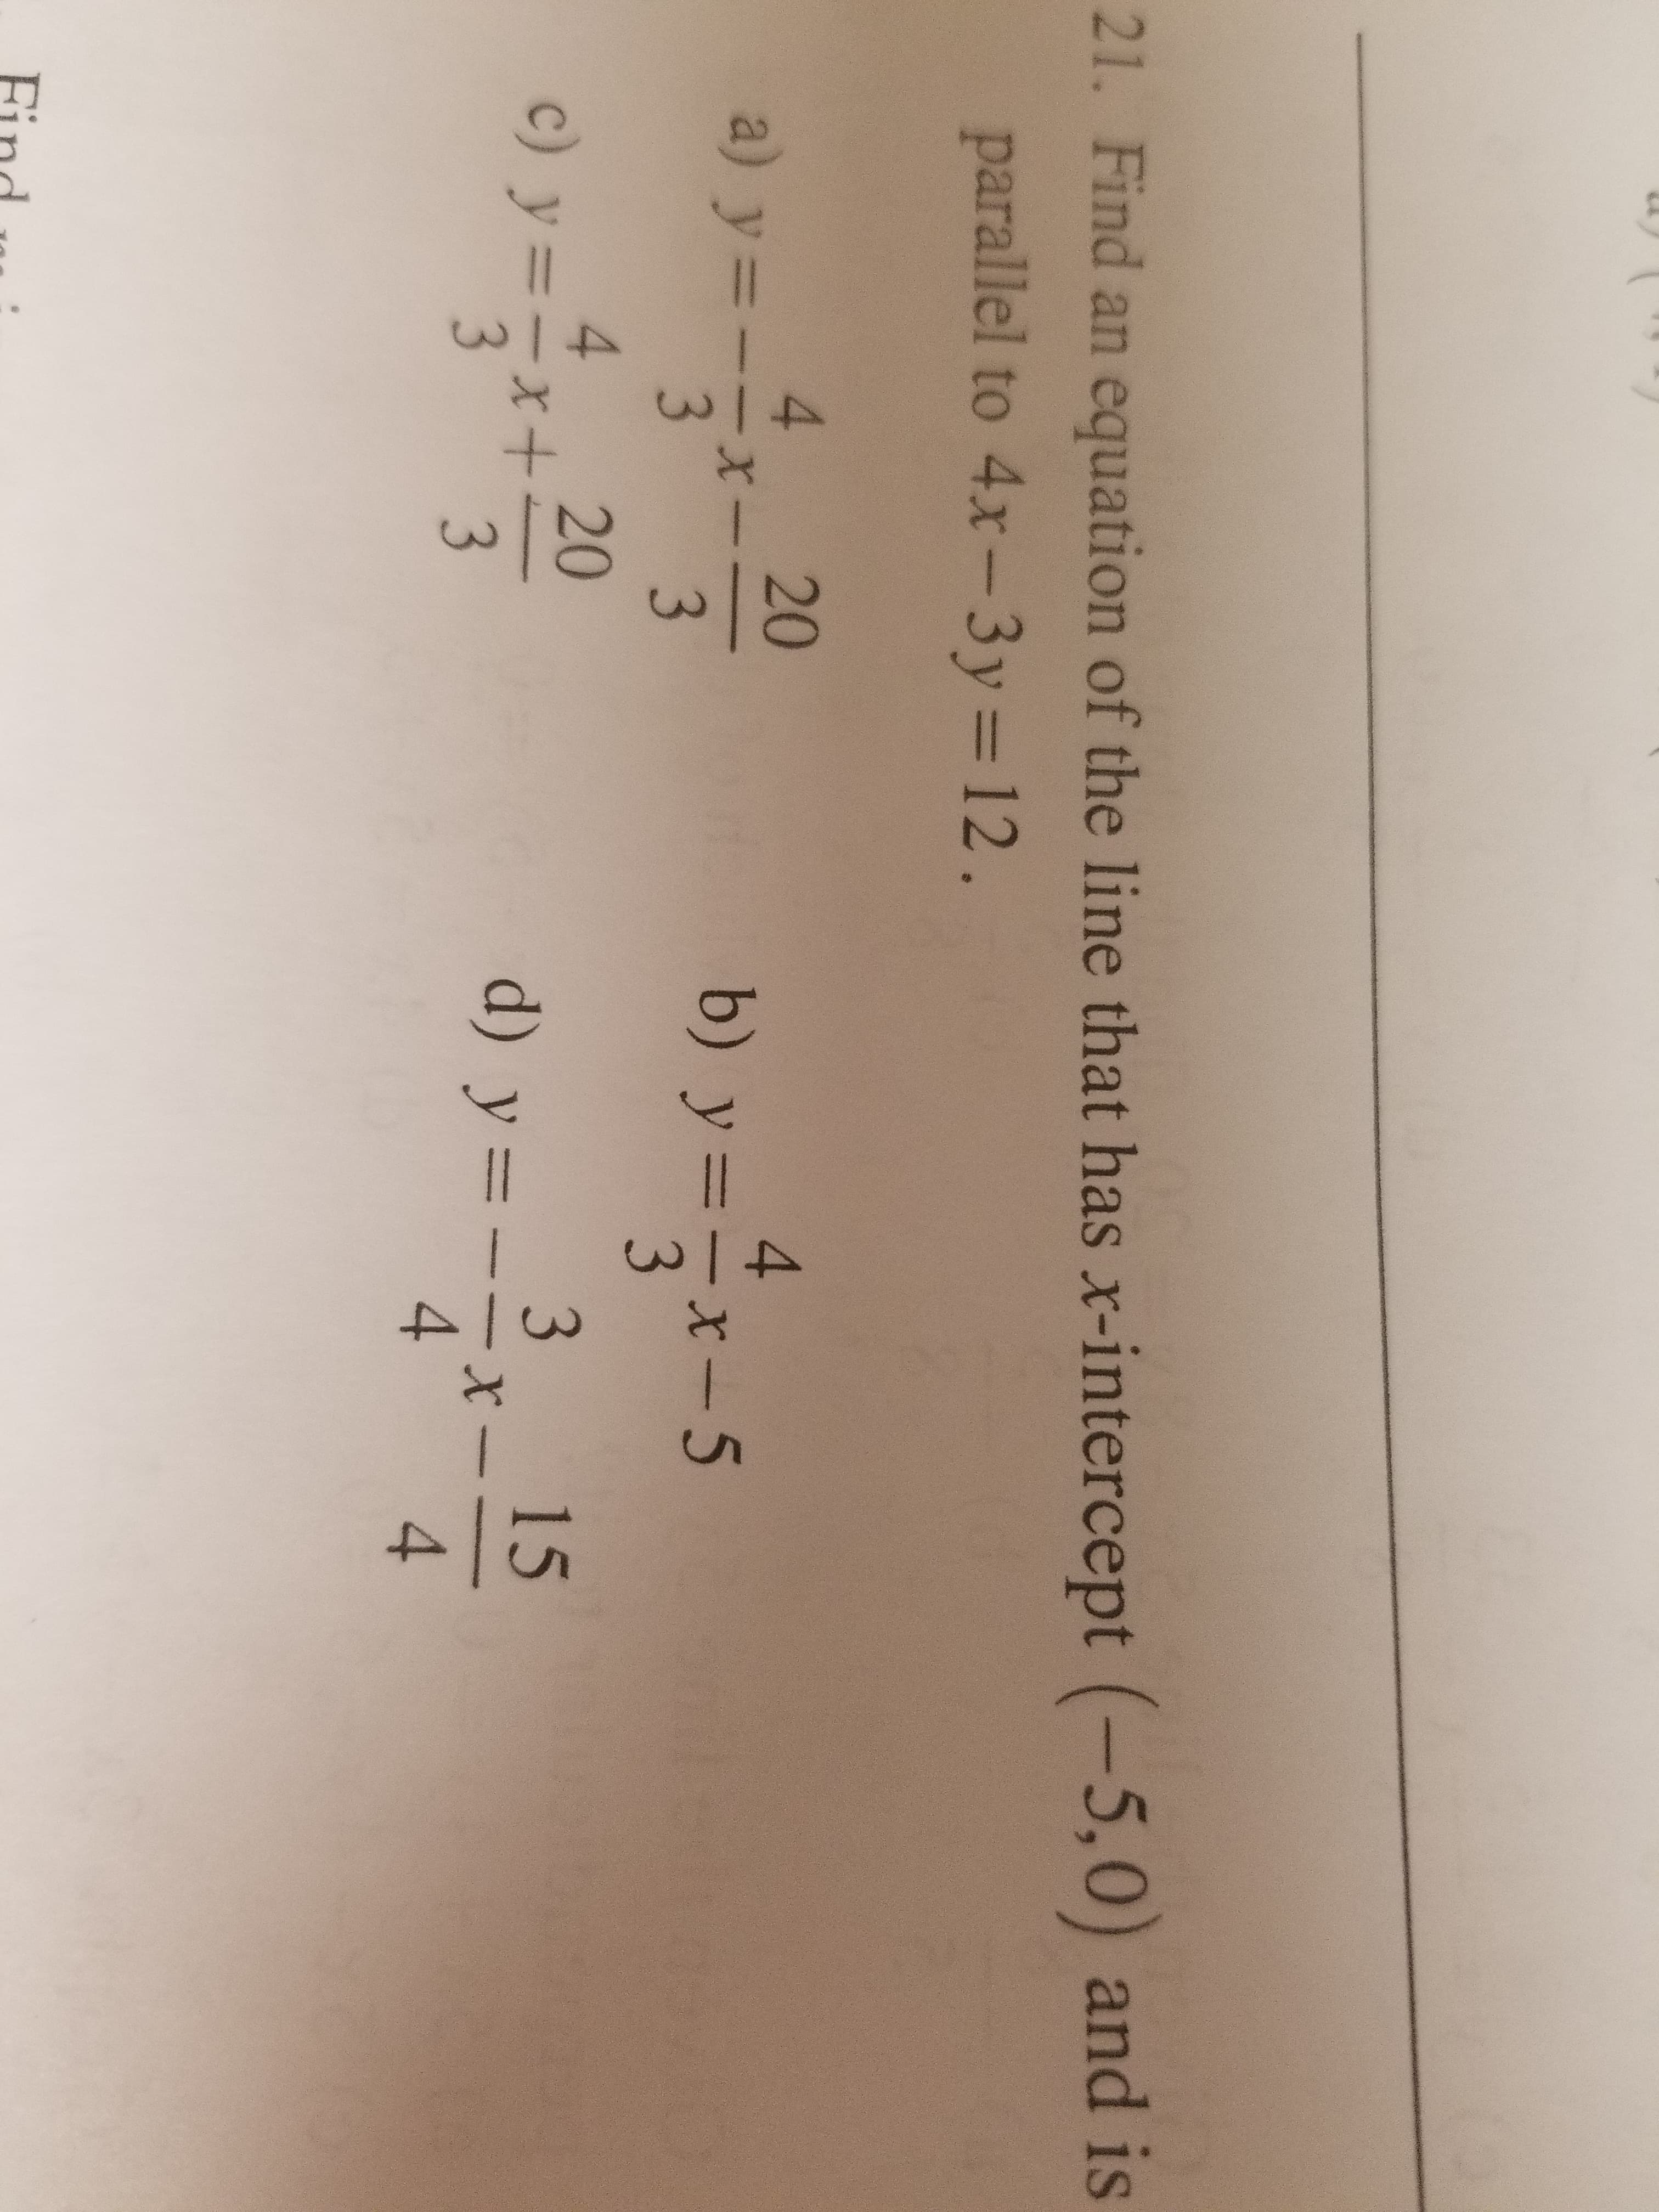 21. Find an equation of the line that has x-intercept (-5,0) and is
9
parallel to 4x-3y 12.
4 20
b) y-x-5
4 20
3 15
3
4
d)
